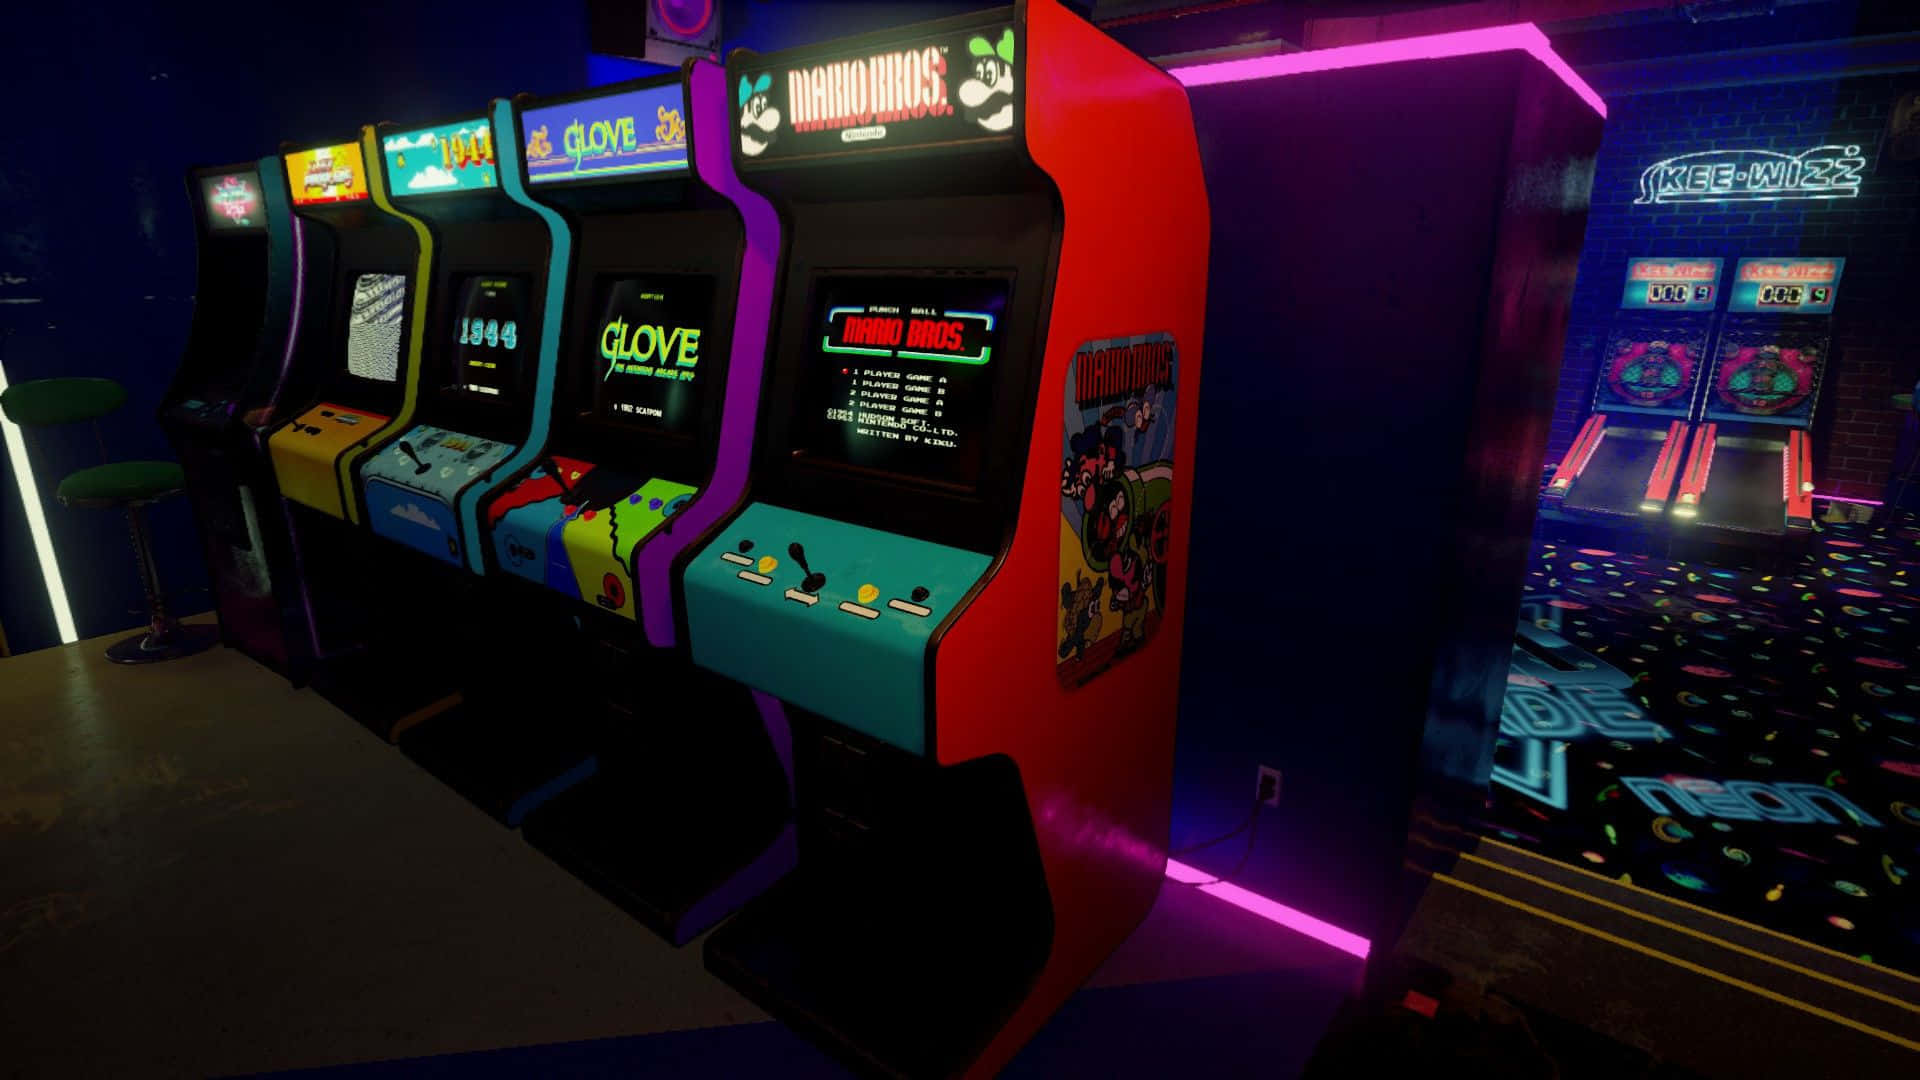 Step back in time to the 80s with classic arcade games. Wallpaper